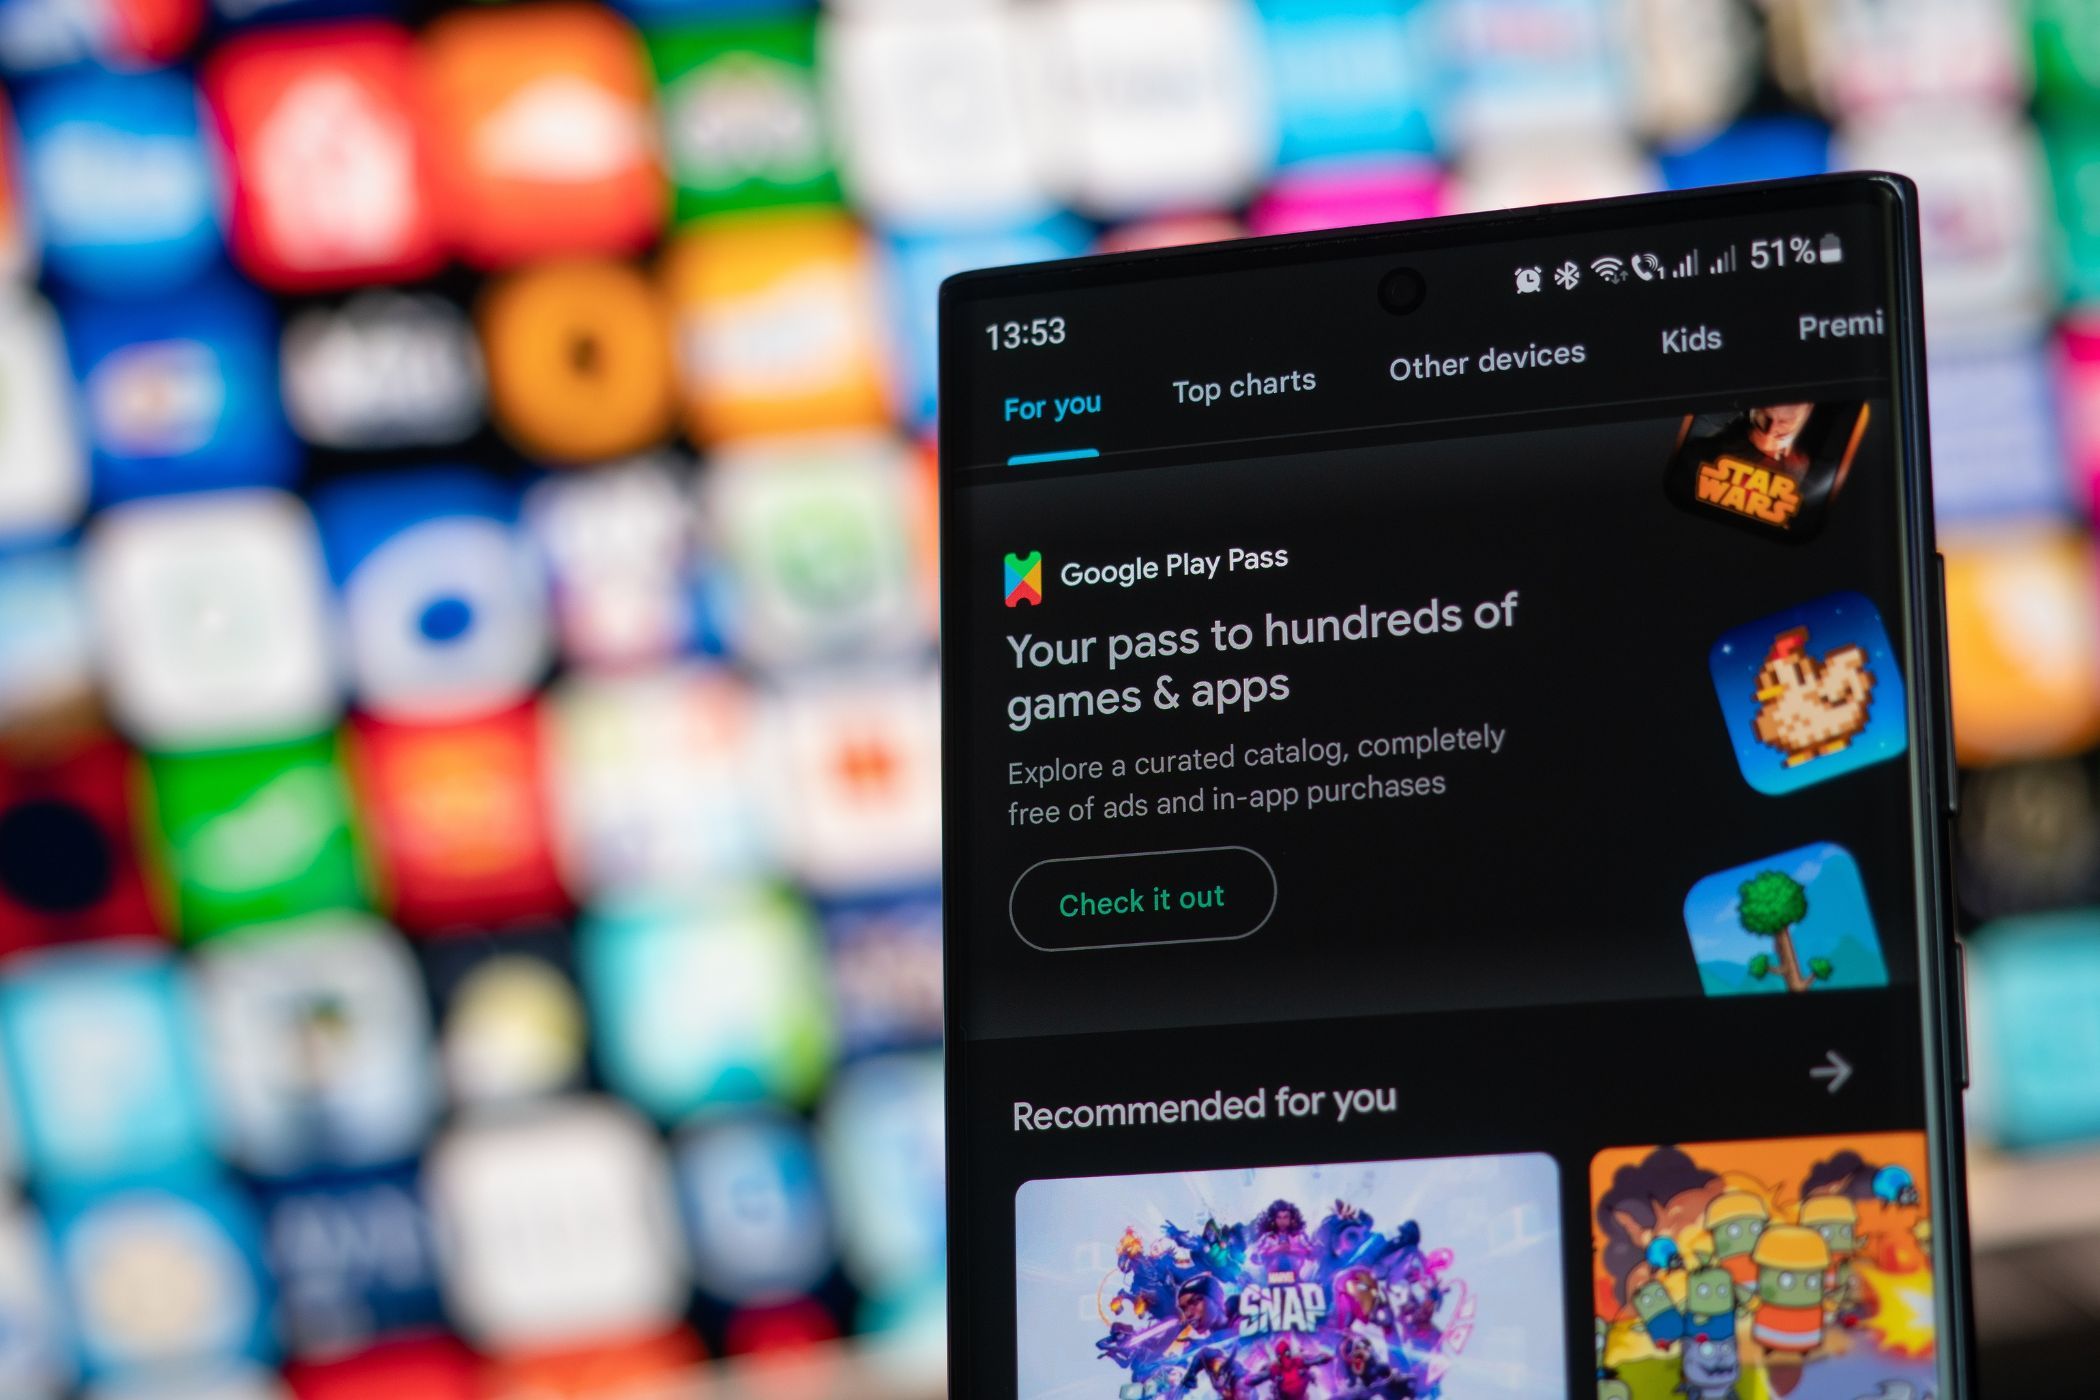 google play pass offer on a smartphone